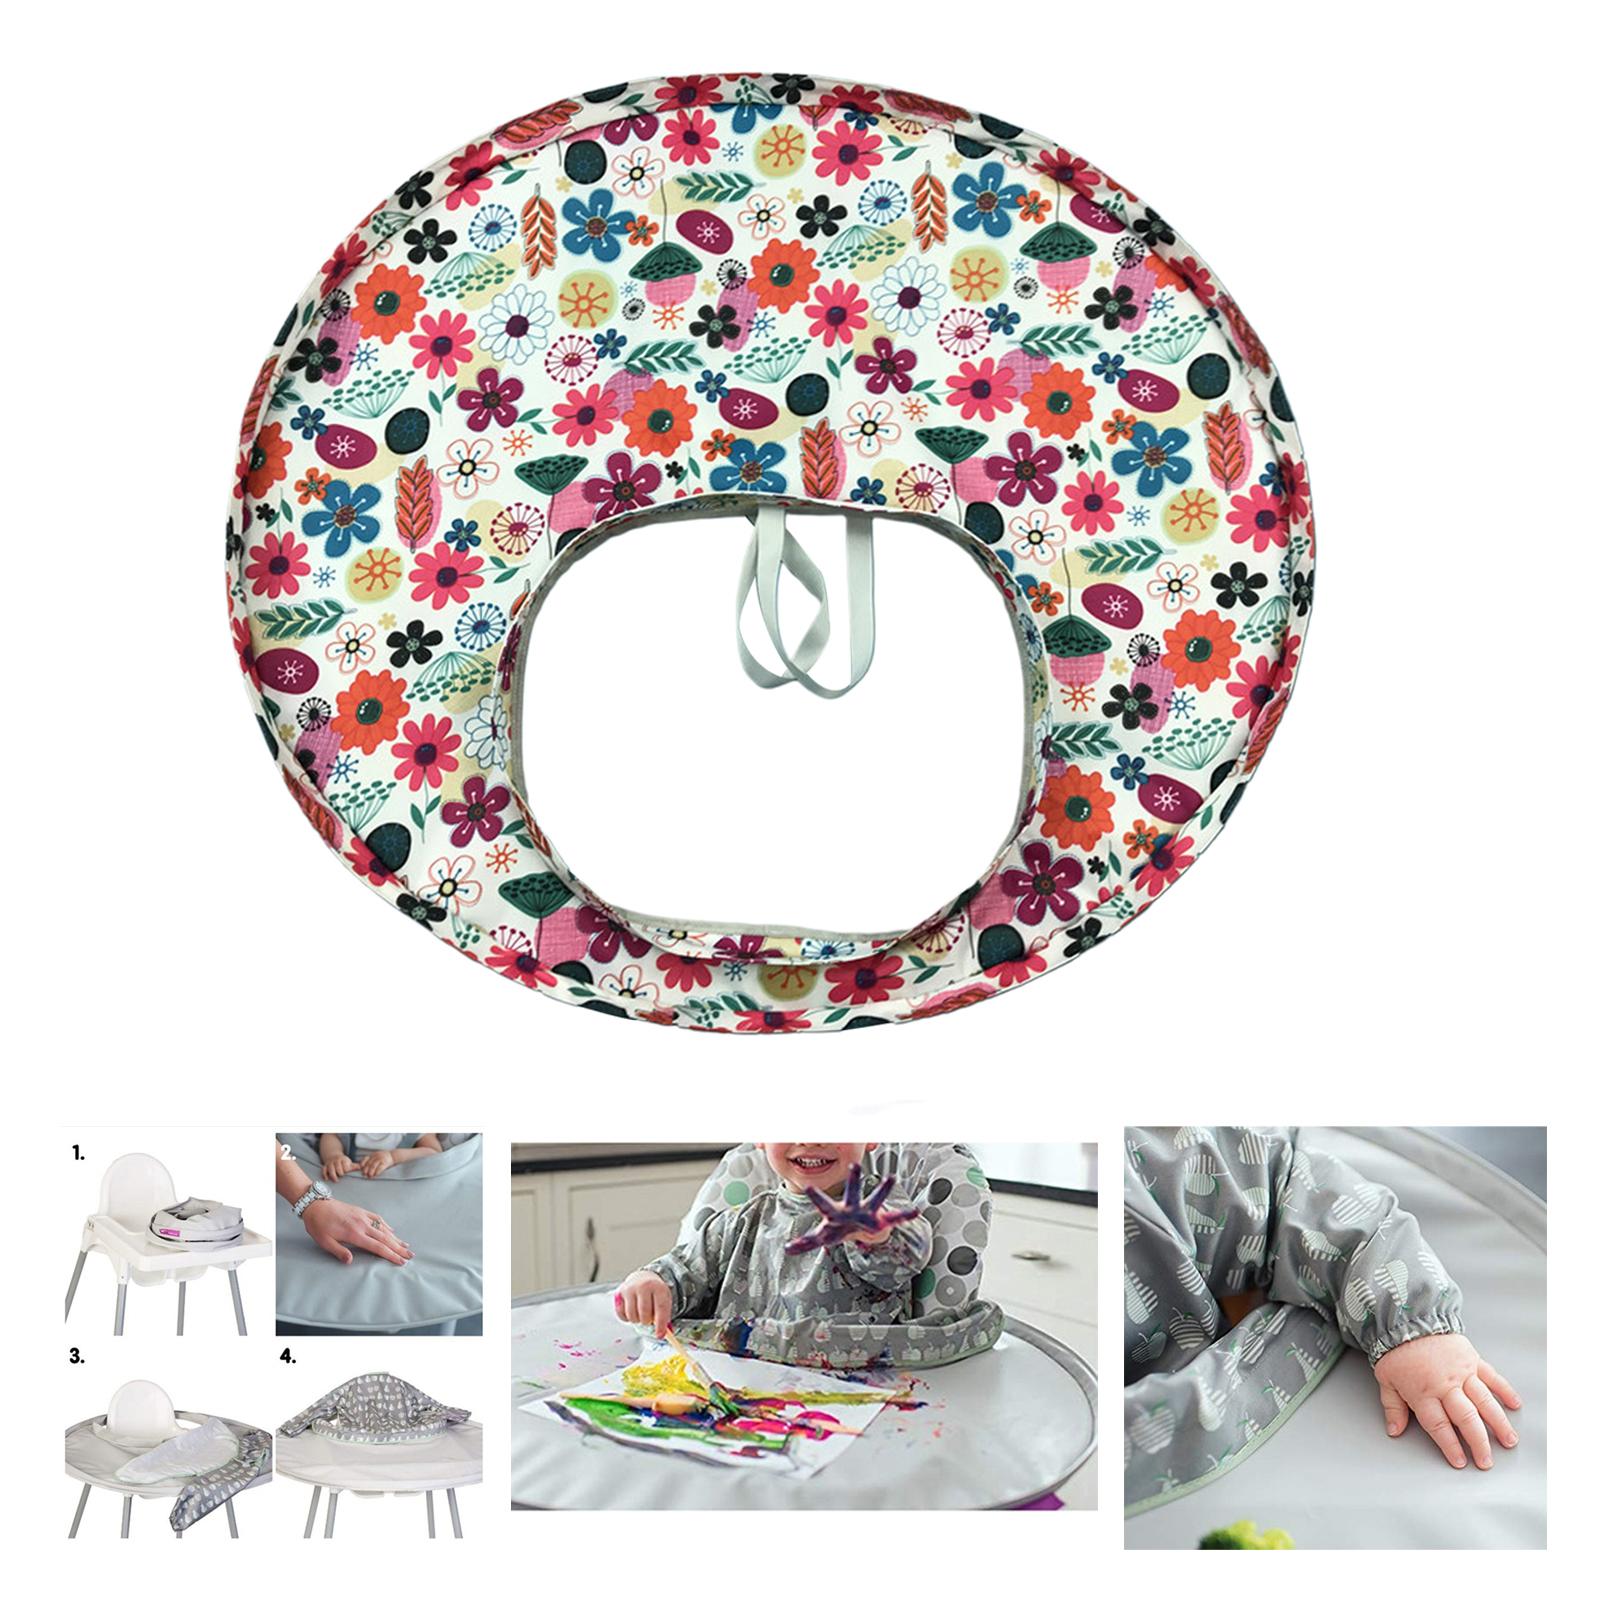 Portable Baby Eating Table Mat Cushion Table Mat Cover for Toddler Kids Flower